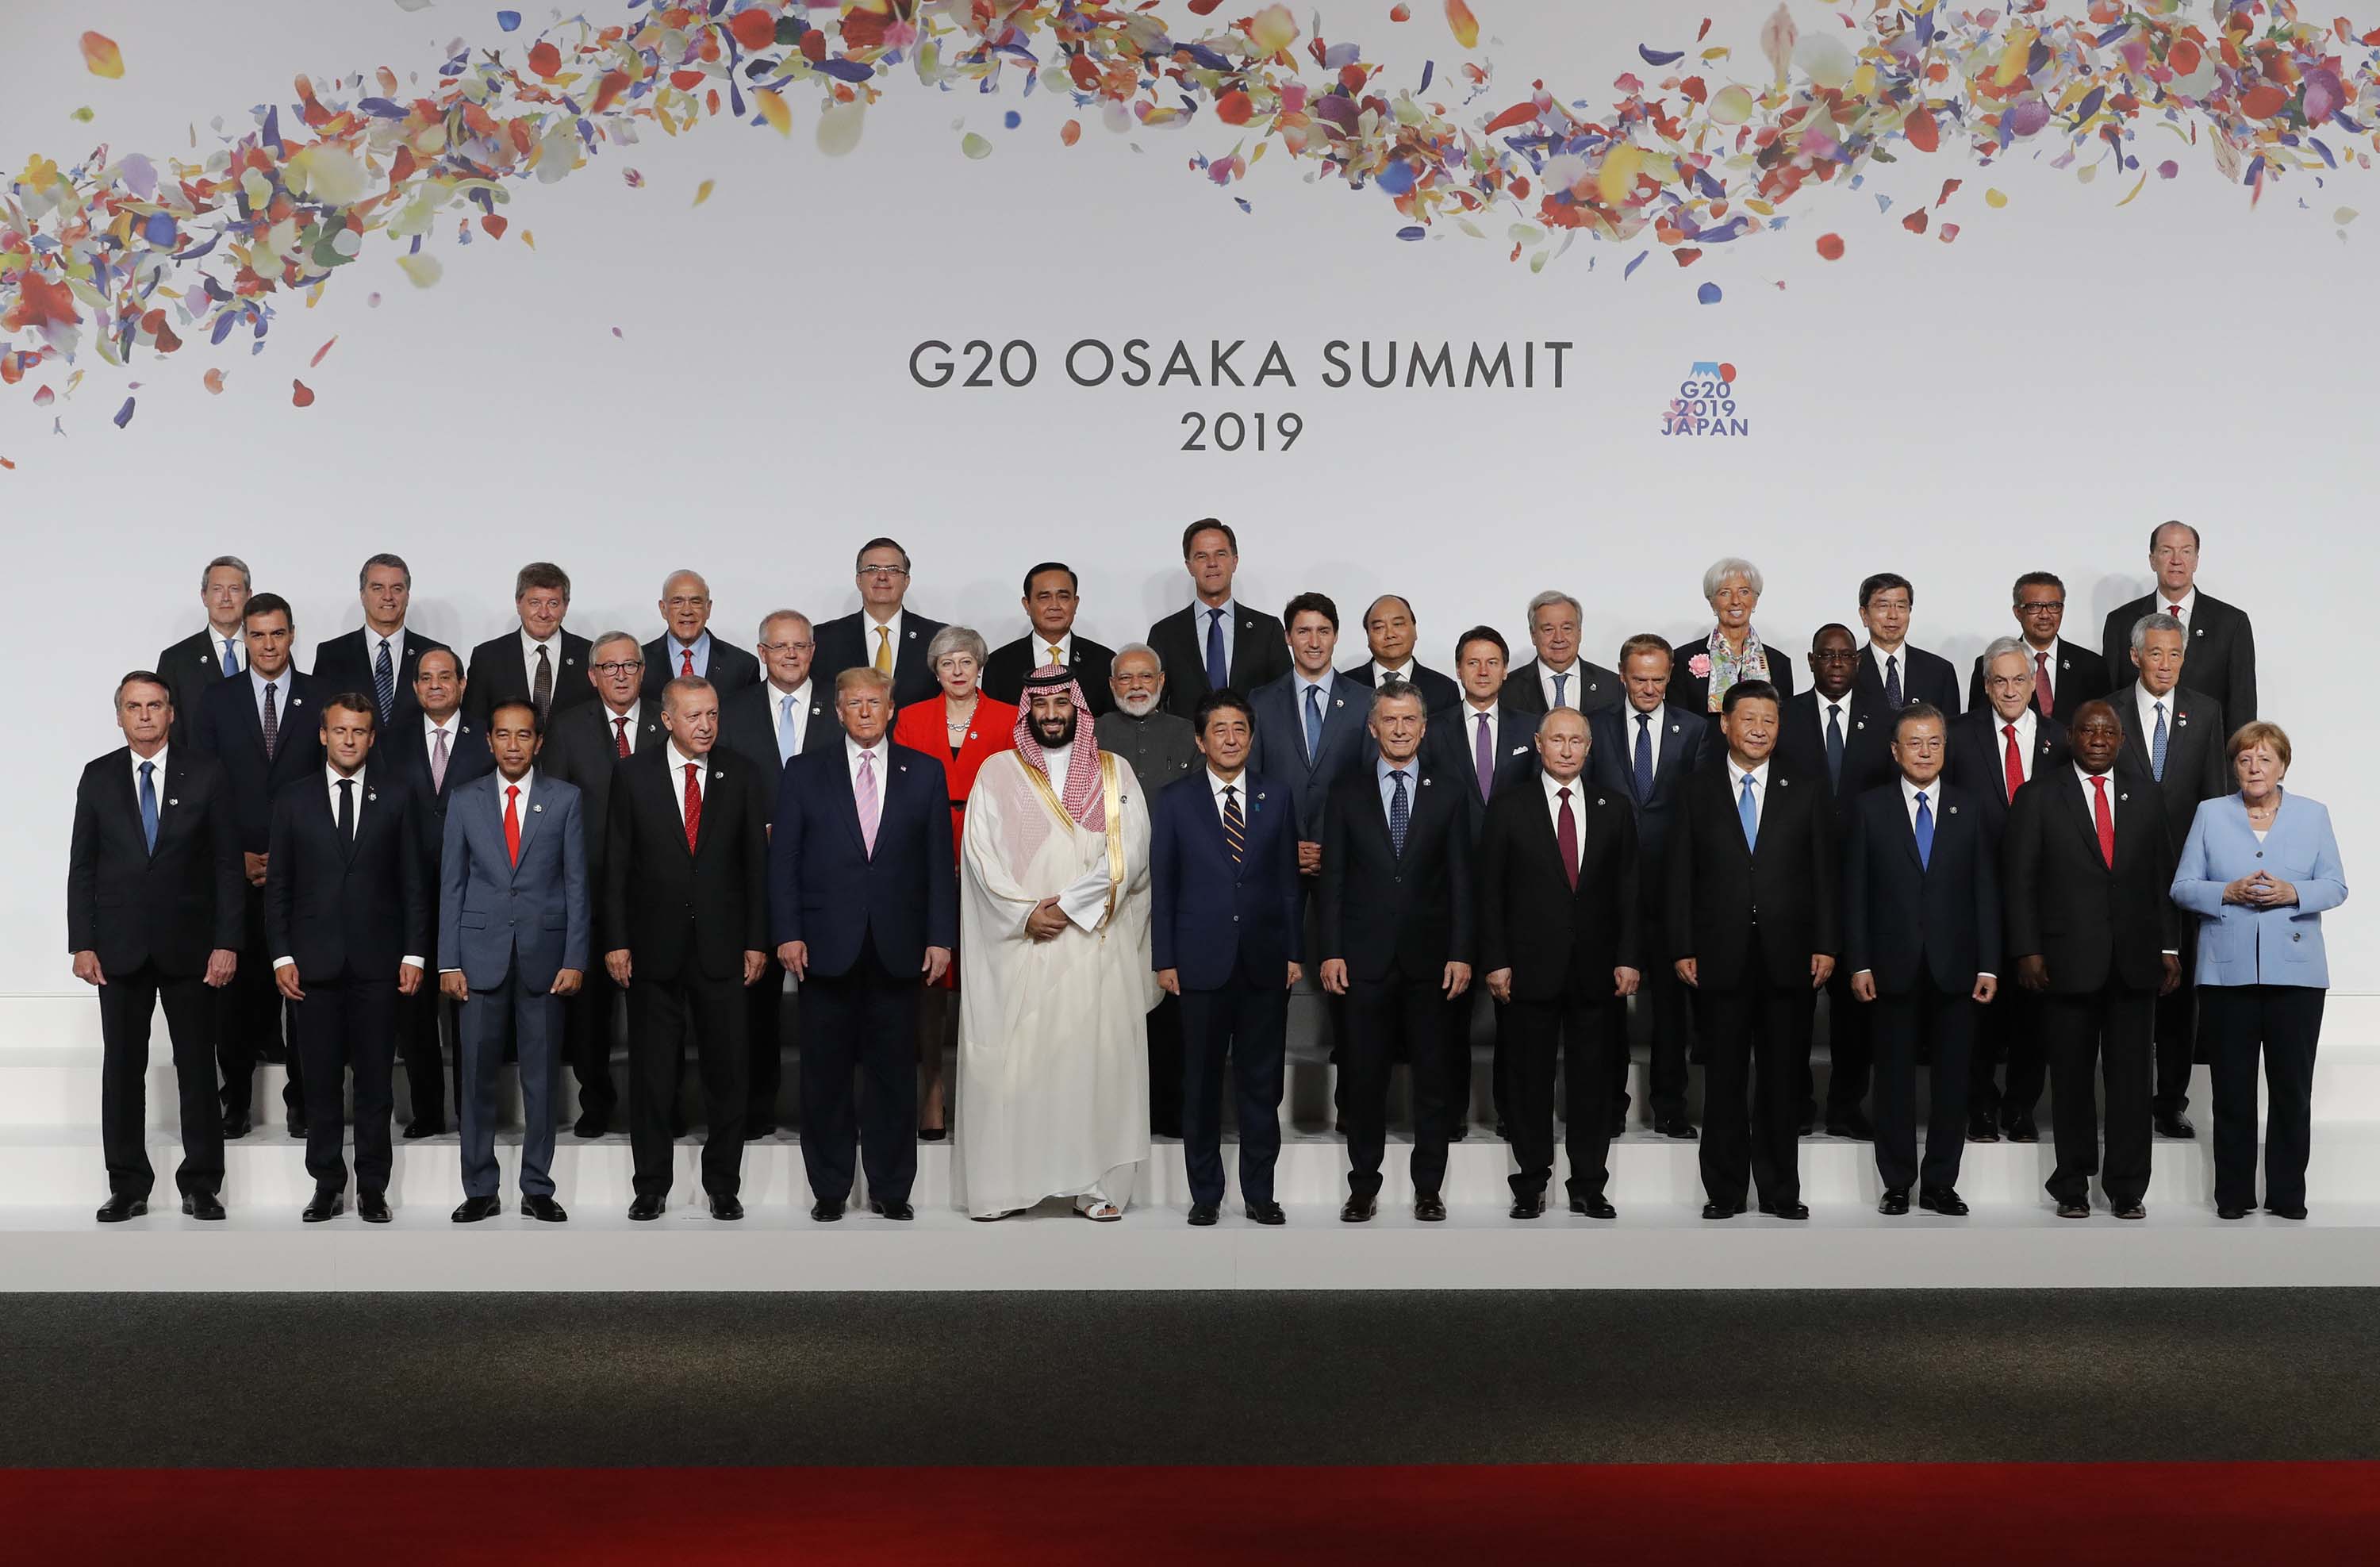 World leaders attend a family photo session at the G20 summit in Osaka, Japan, in June 2019.